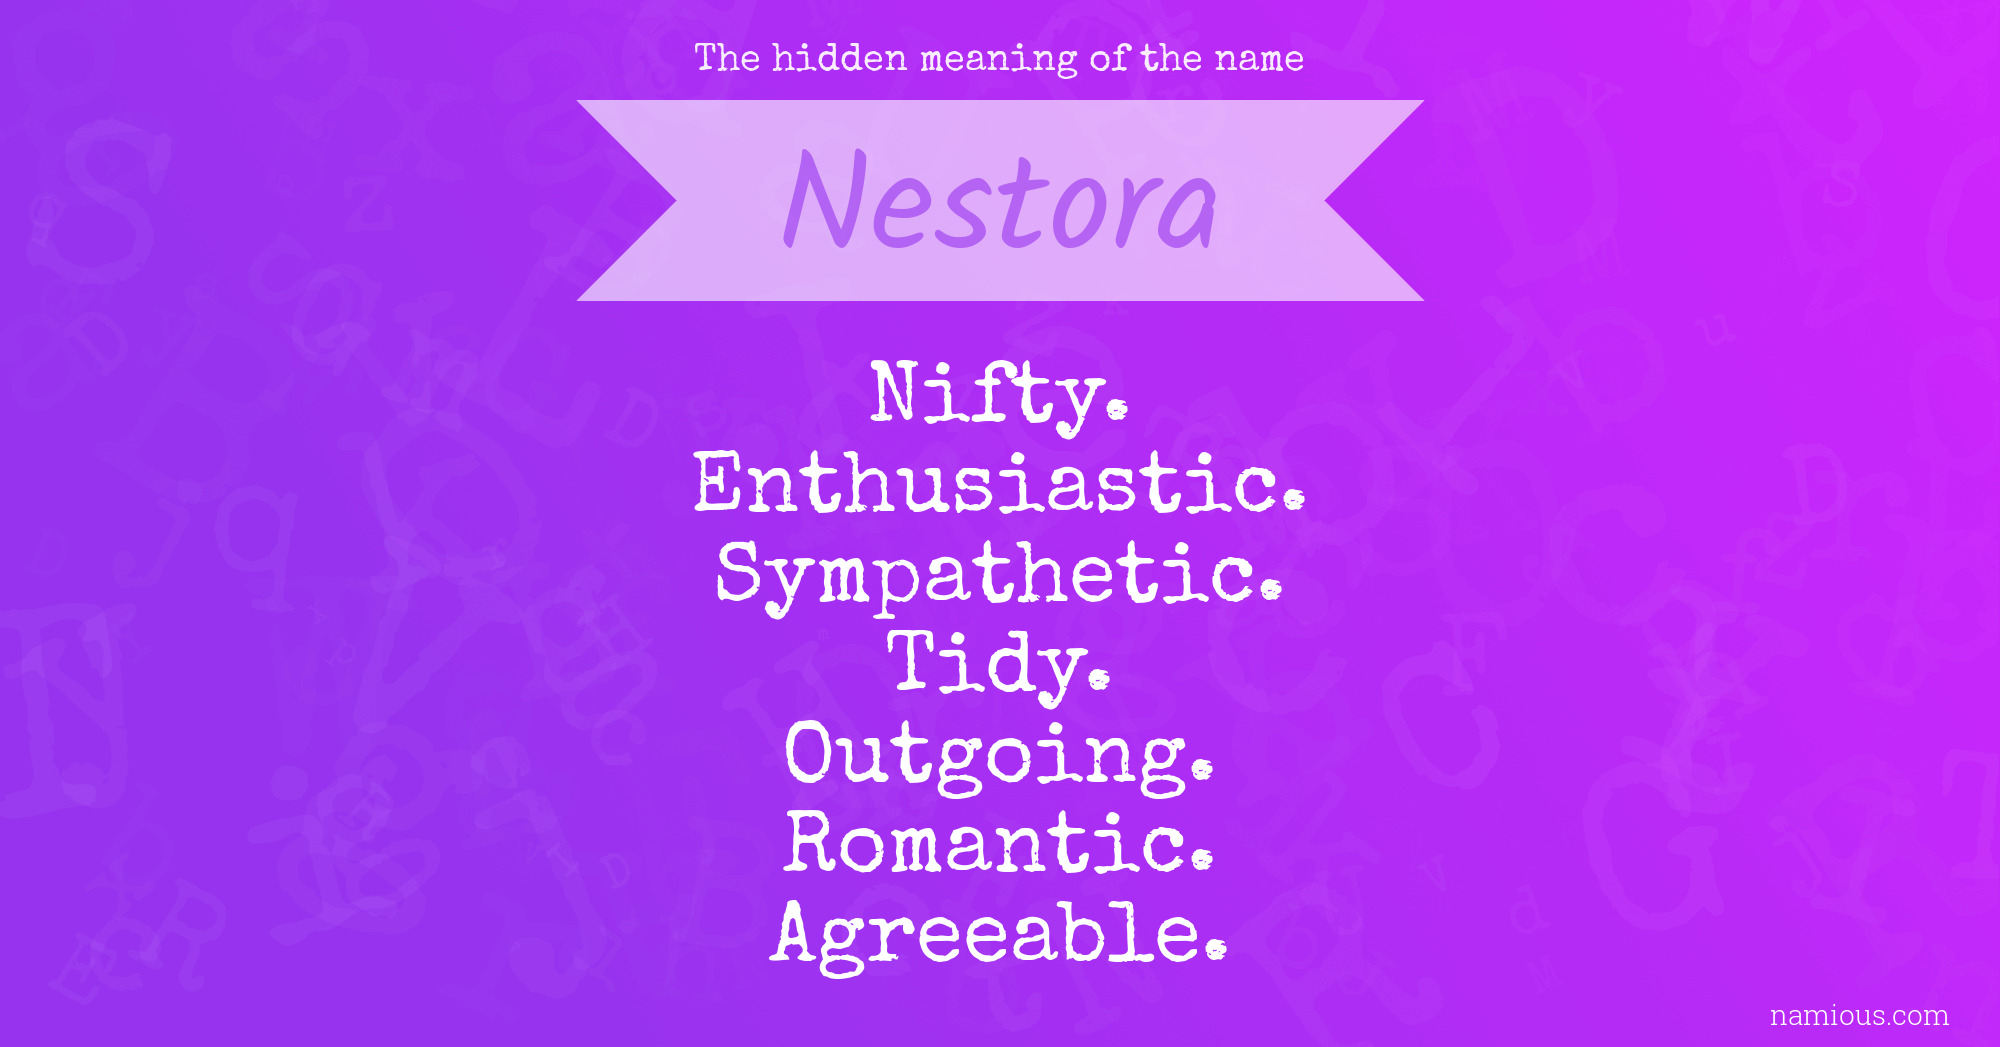 The hidden meaning of the name Nestora